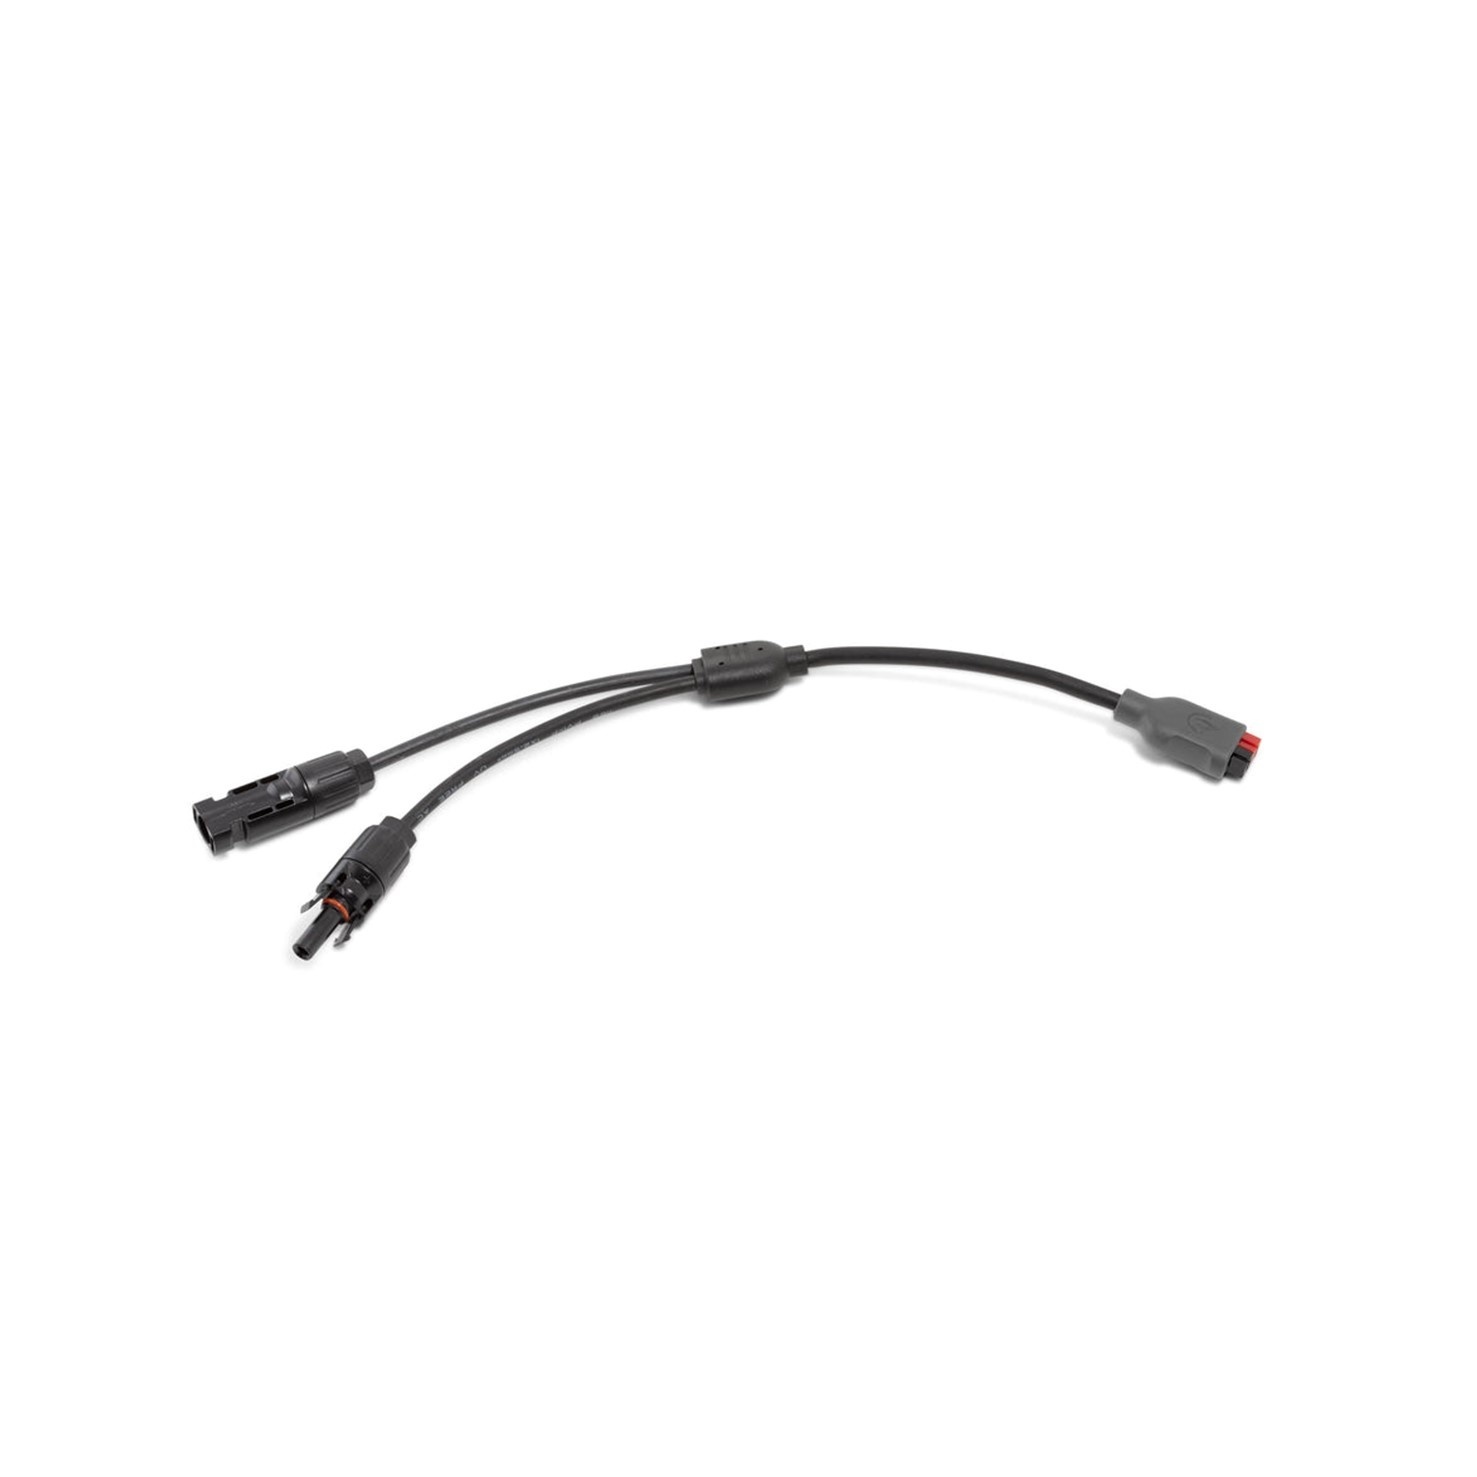 BioLite Solar MC4 To HPP Adapter Cable